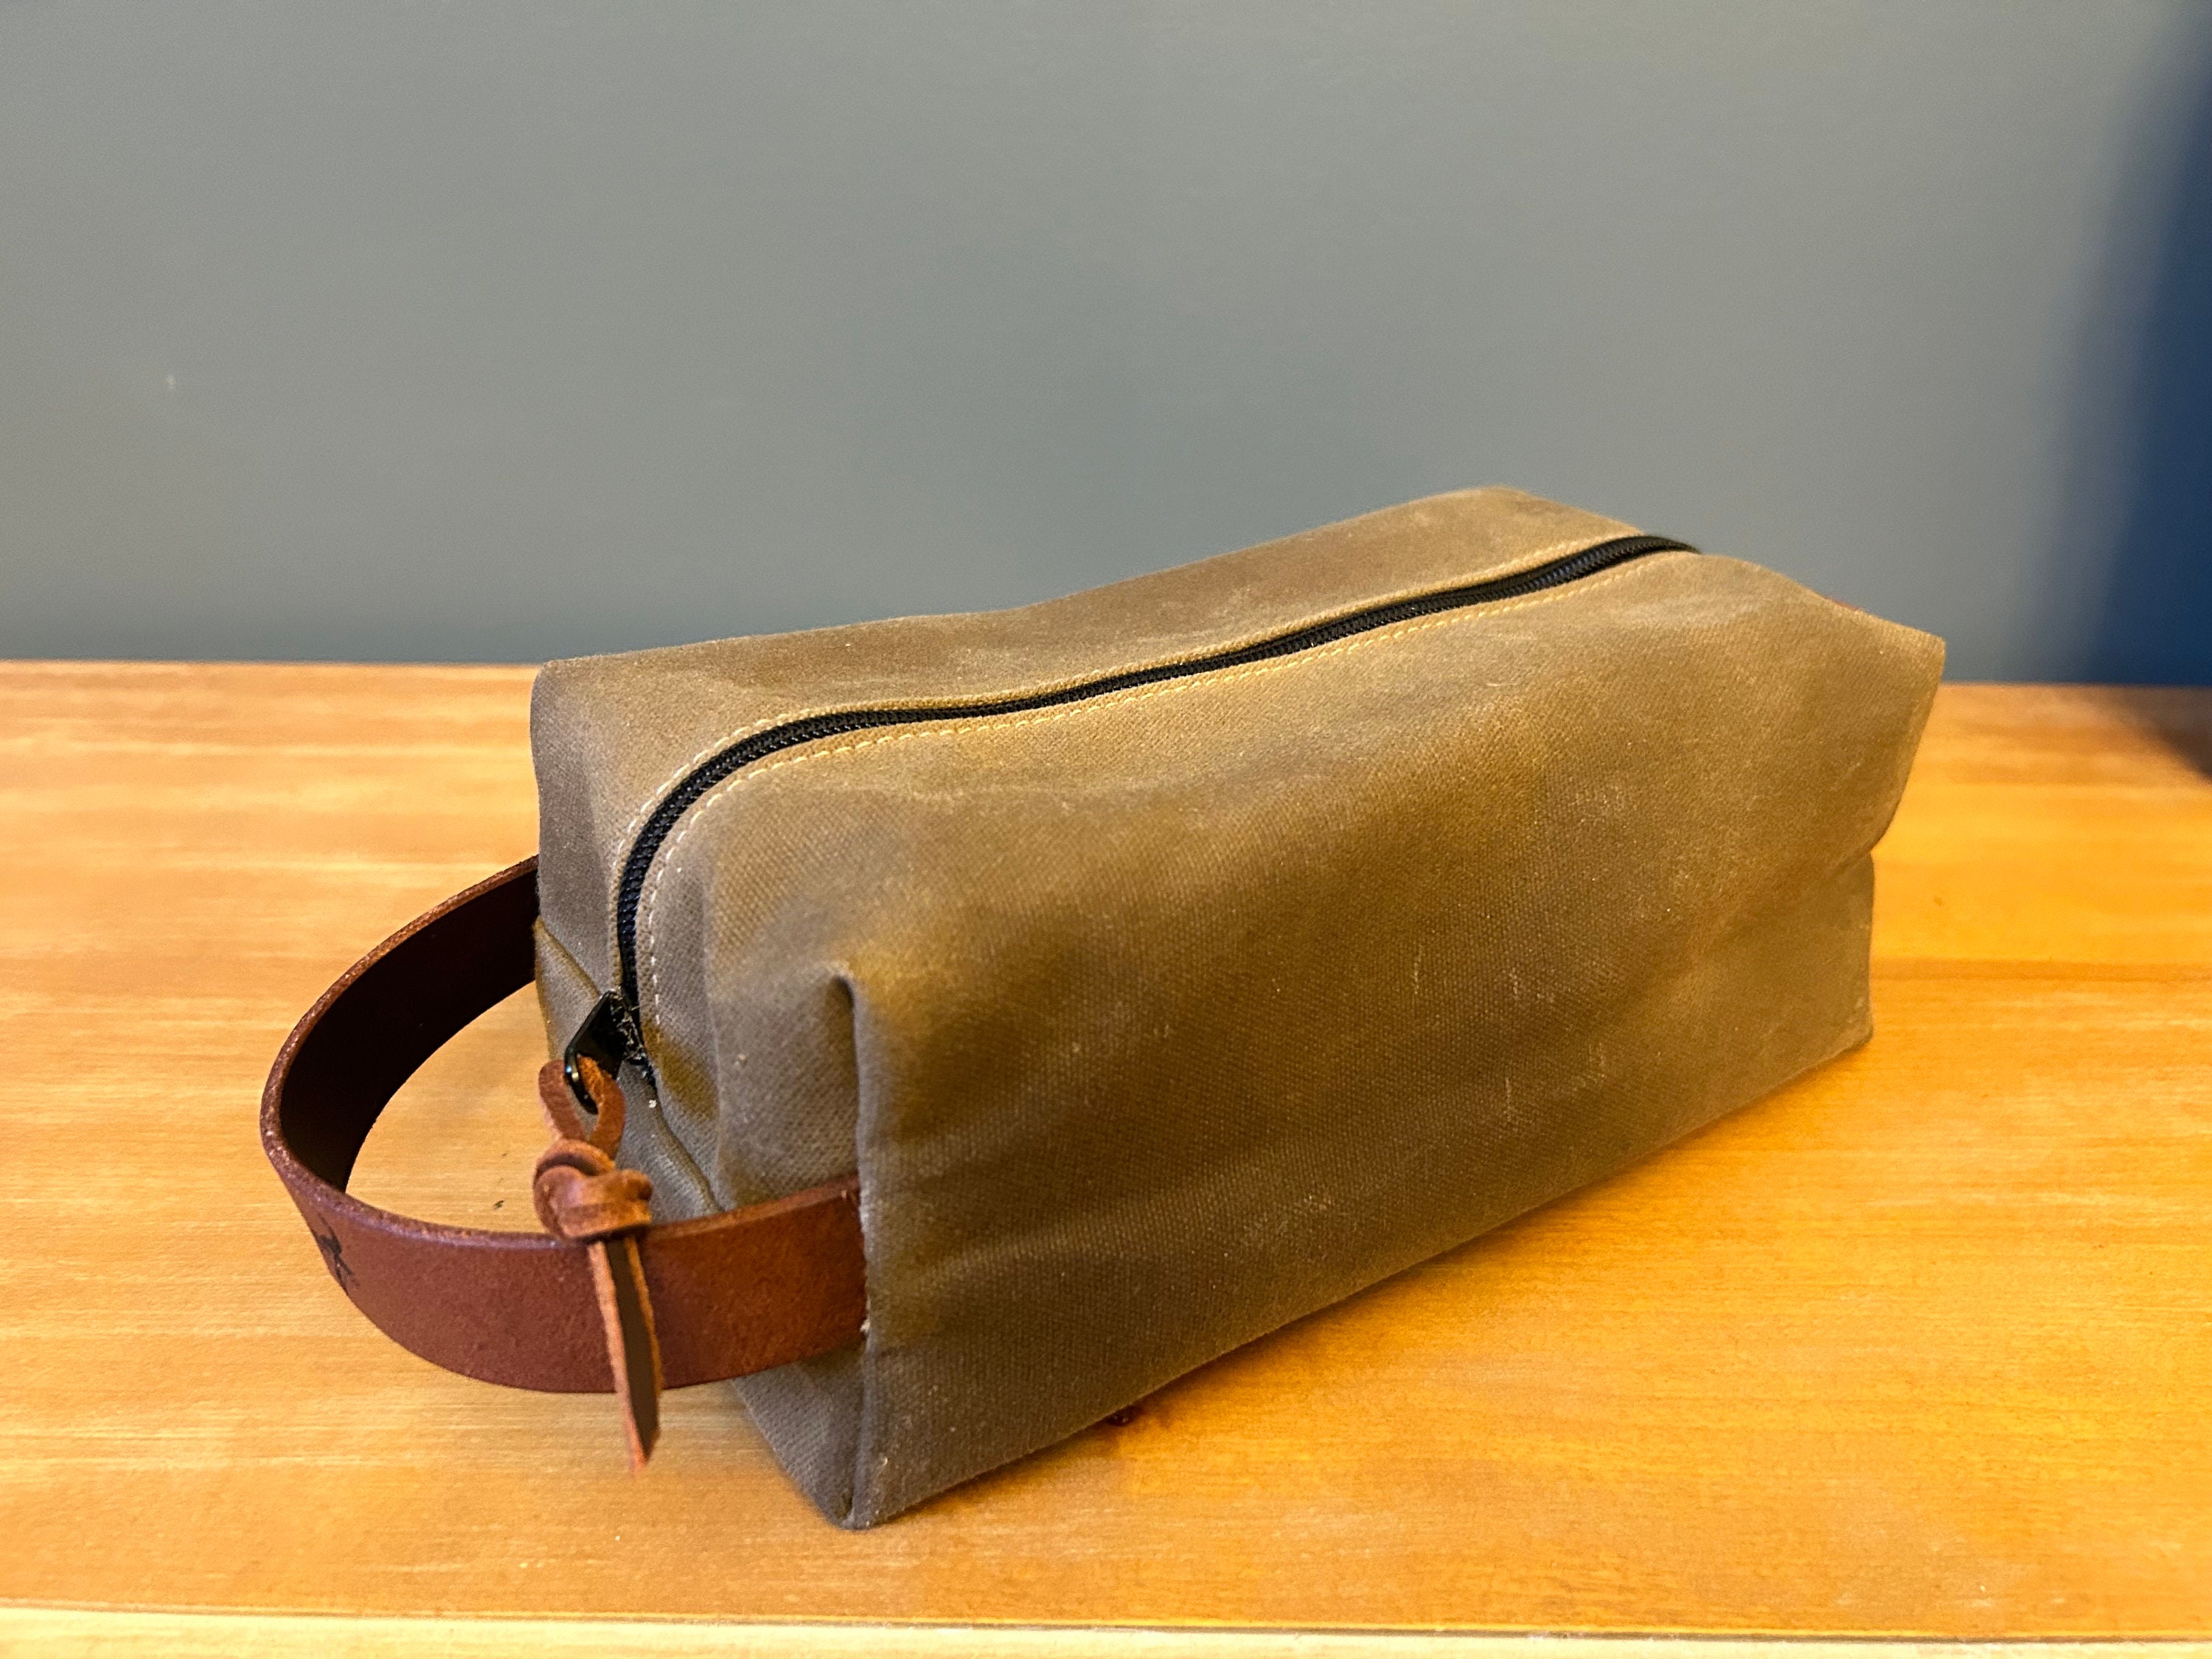 Canvas and Leather Dopp Kit P27 - Original Pouches / Dopp kits by